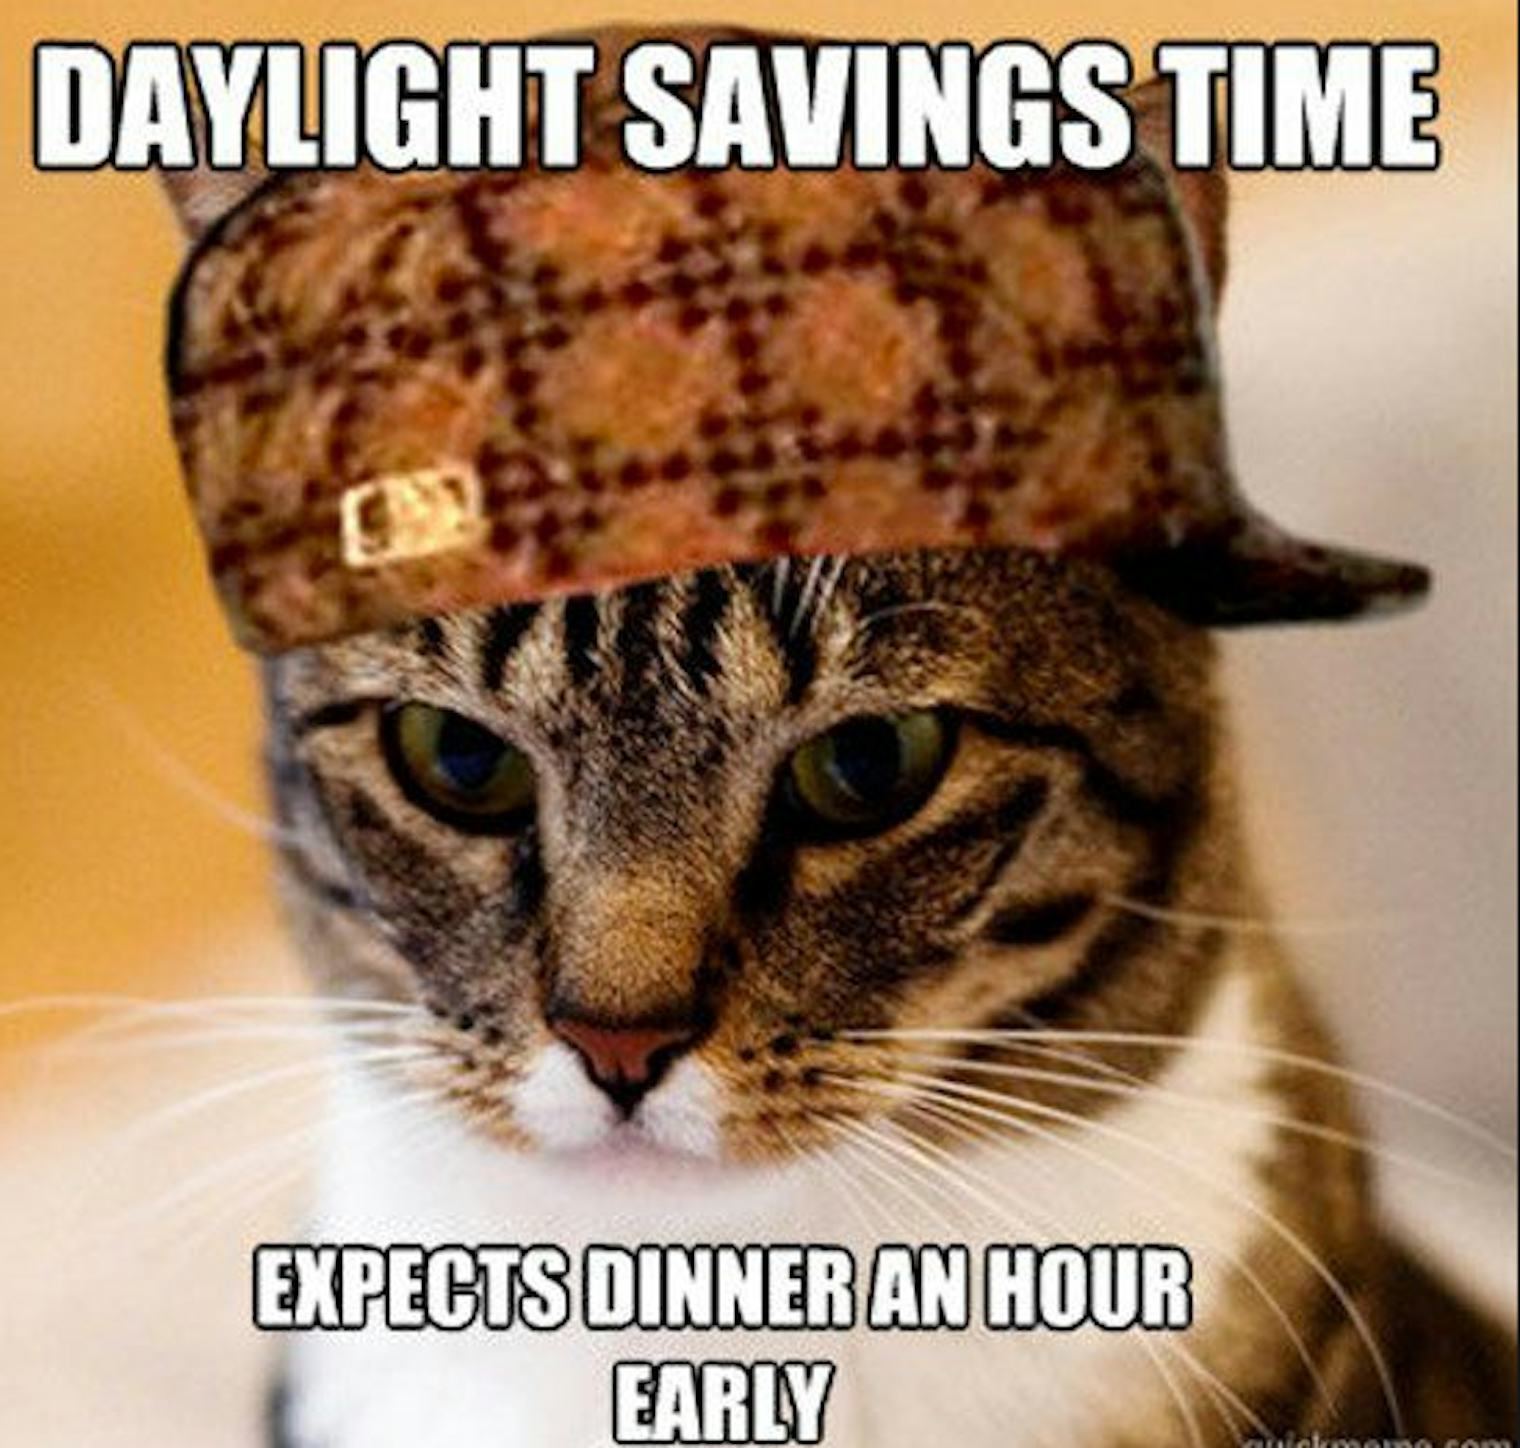 Daylight Saving Time Memes, Because You'll Need Something To Cheer You